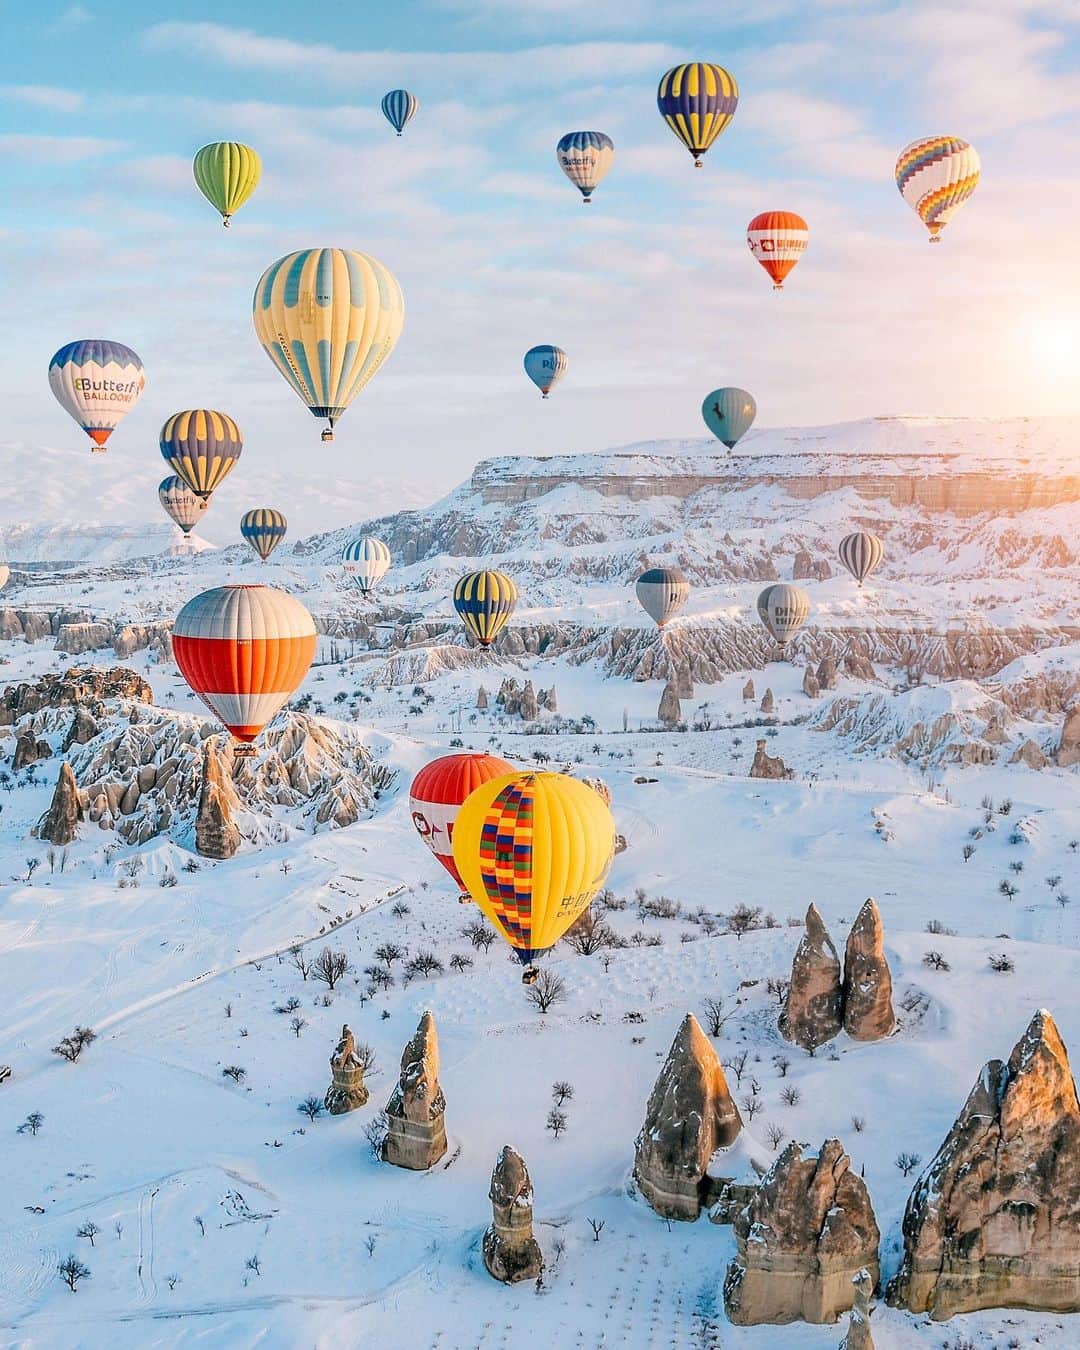 Izkizのインスタグラム：「Flying over a snowy landscape of Cappadocia was unforgettable! Partly because it was too beautiful for words and partly because it was -20c up there! Brrr! 🥶   I have been to Cappadocia many times but this was by far the best hot air balloon ride I’ve been on. Everything looked even more magical in it’s white winter coat.   Have you ever been in a hot air balloon?」